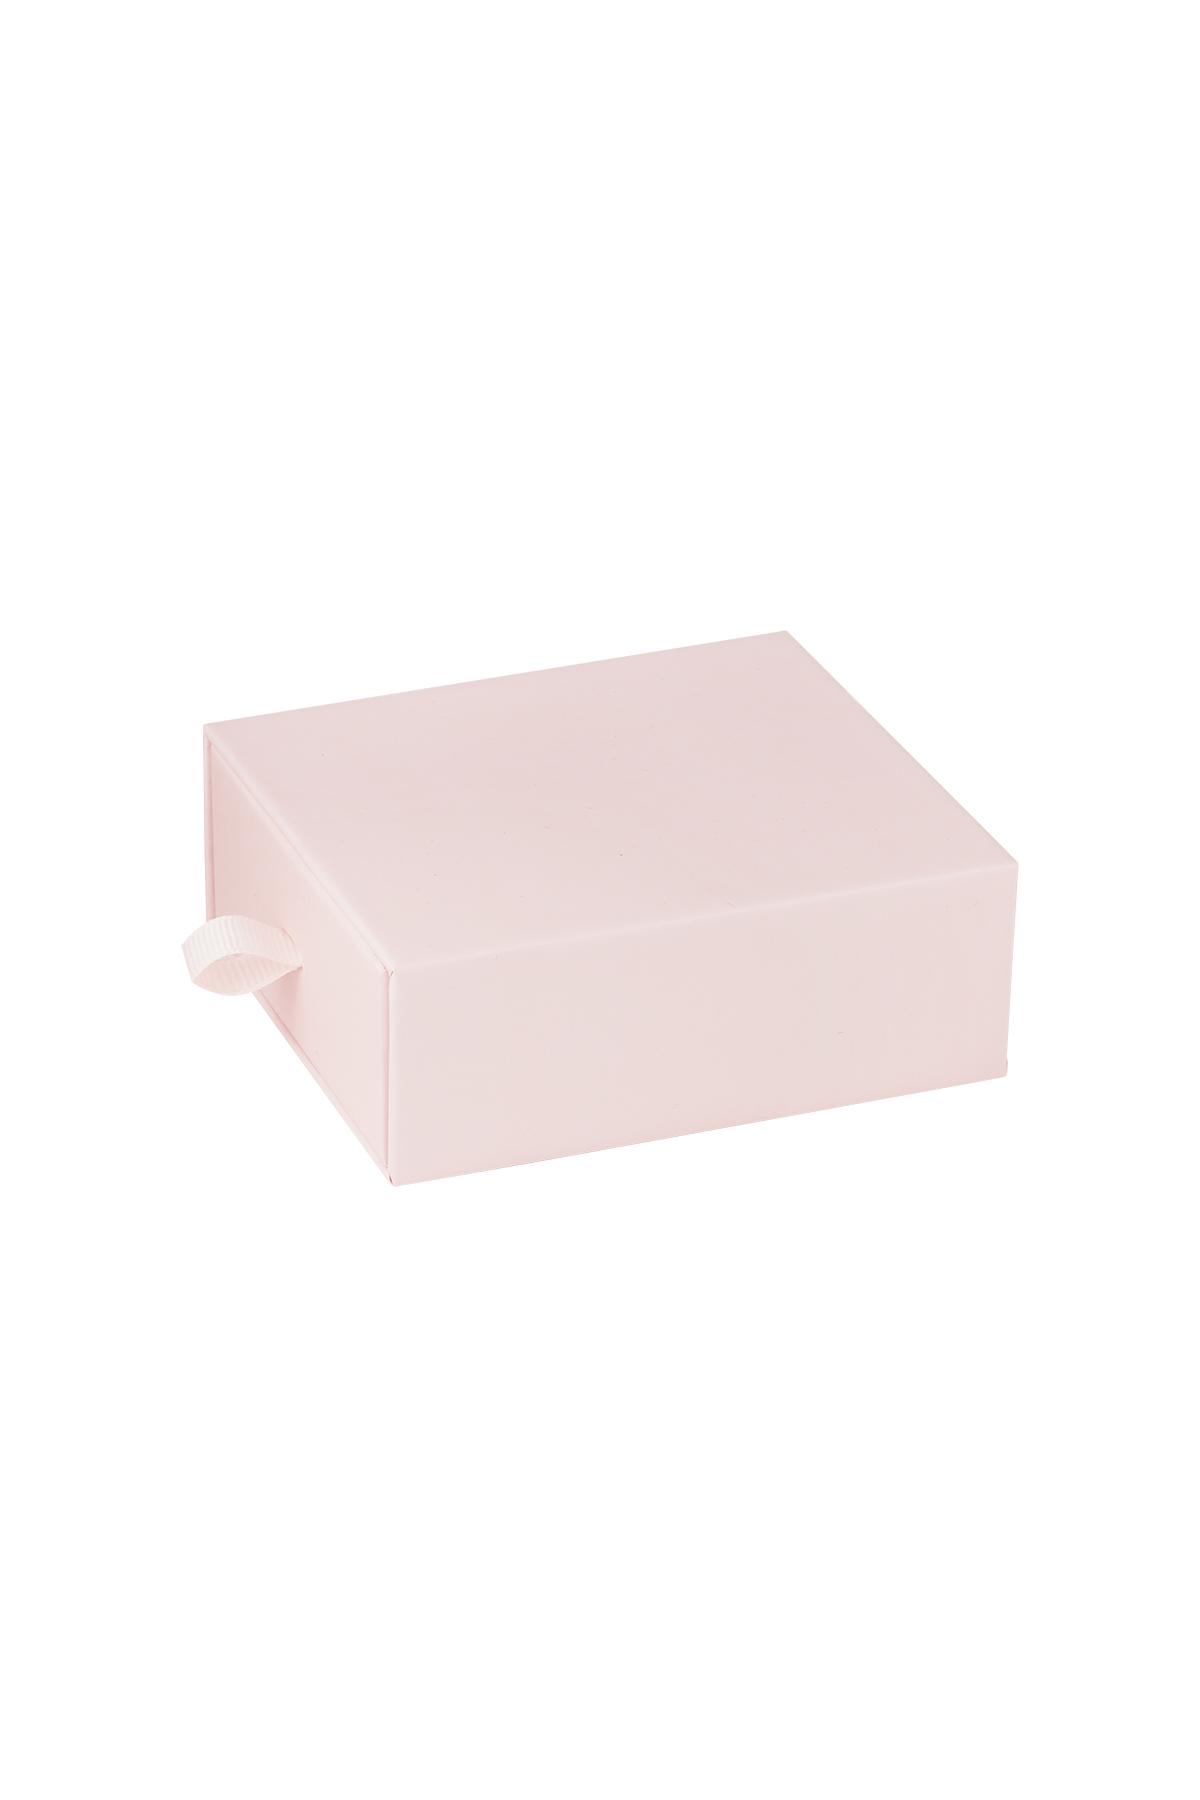 Extendable jewelry box Pink Paper